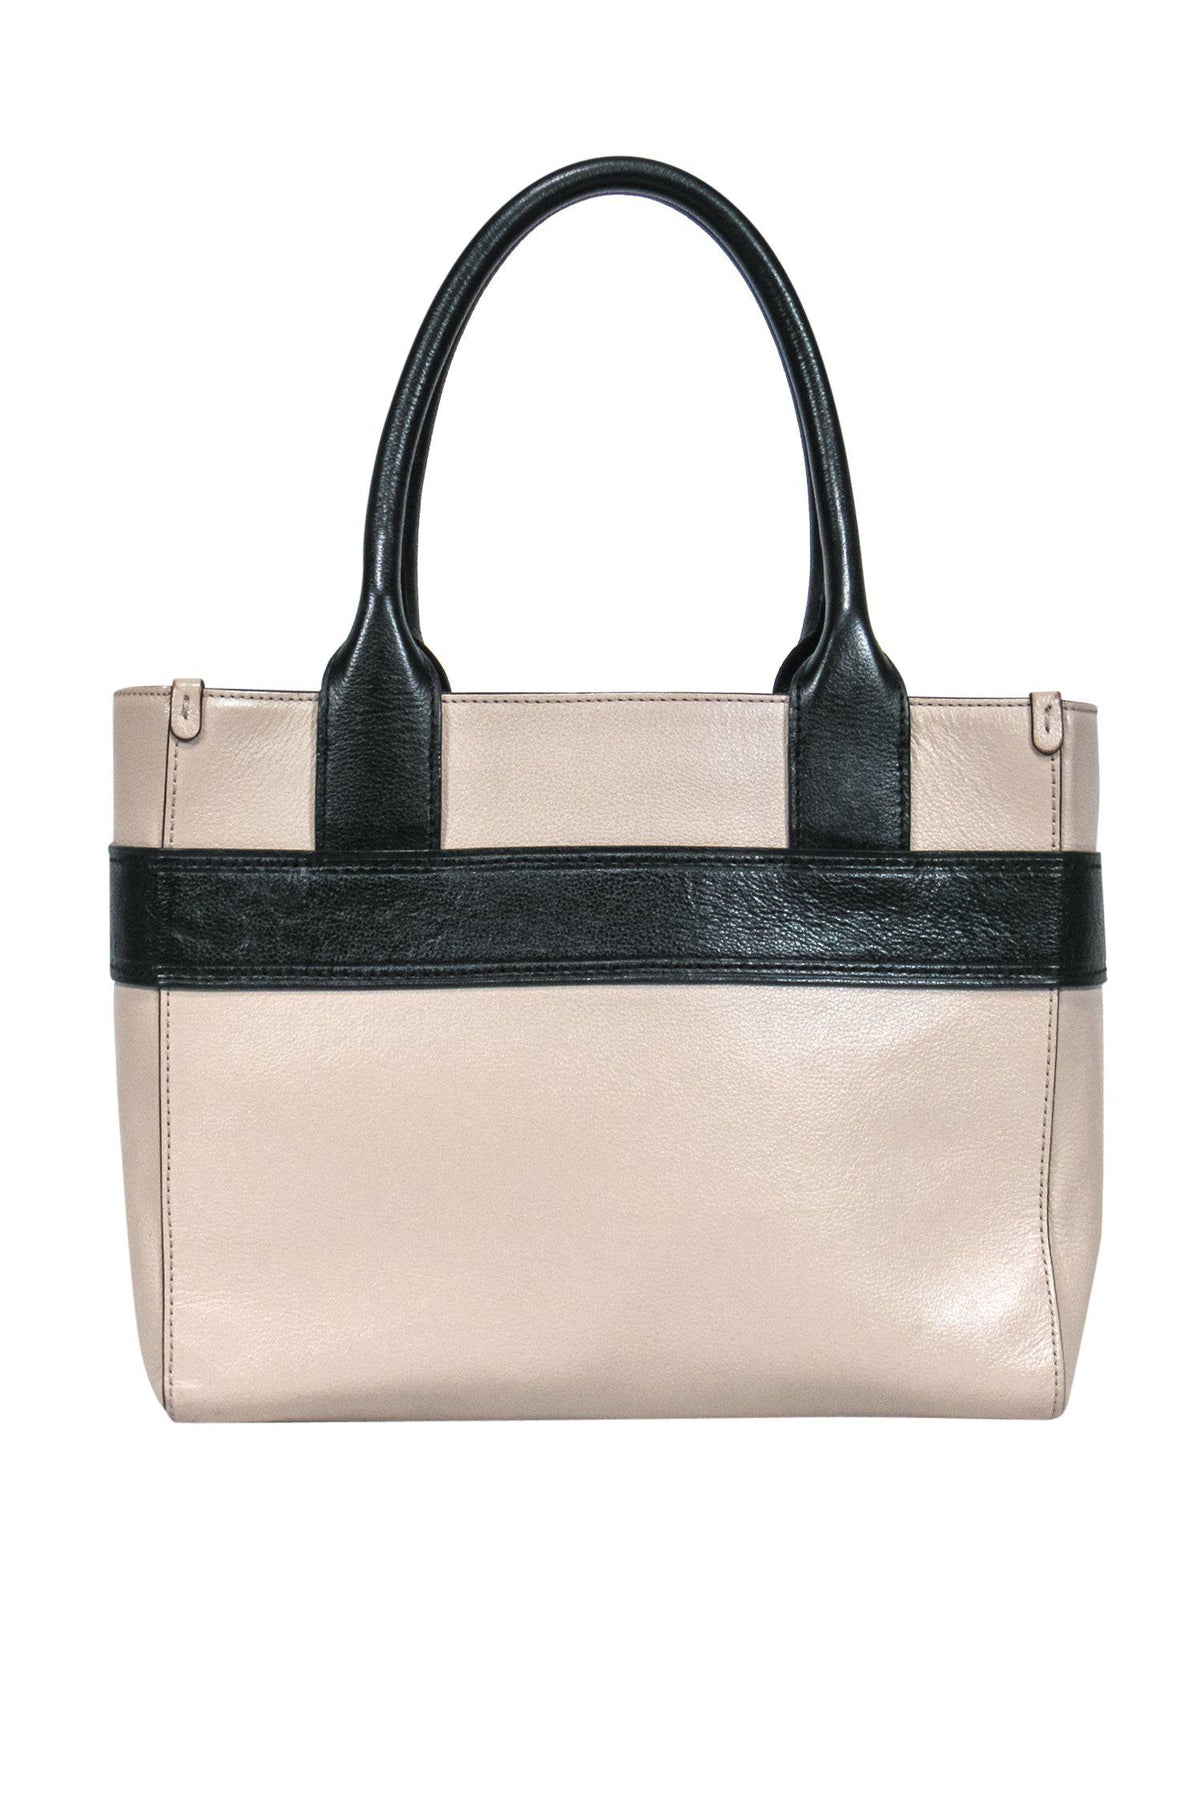 Shop Our Kate Spade - Beige & Black Pebbled Leather Tote w/ Bow ...